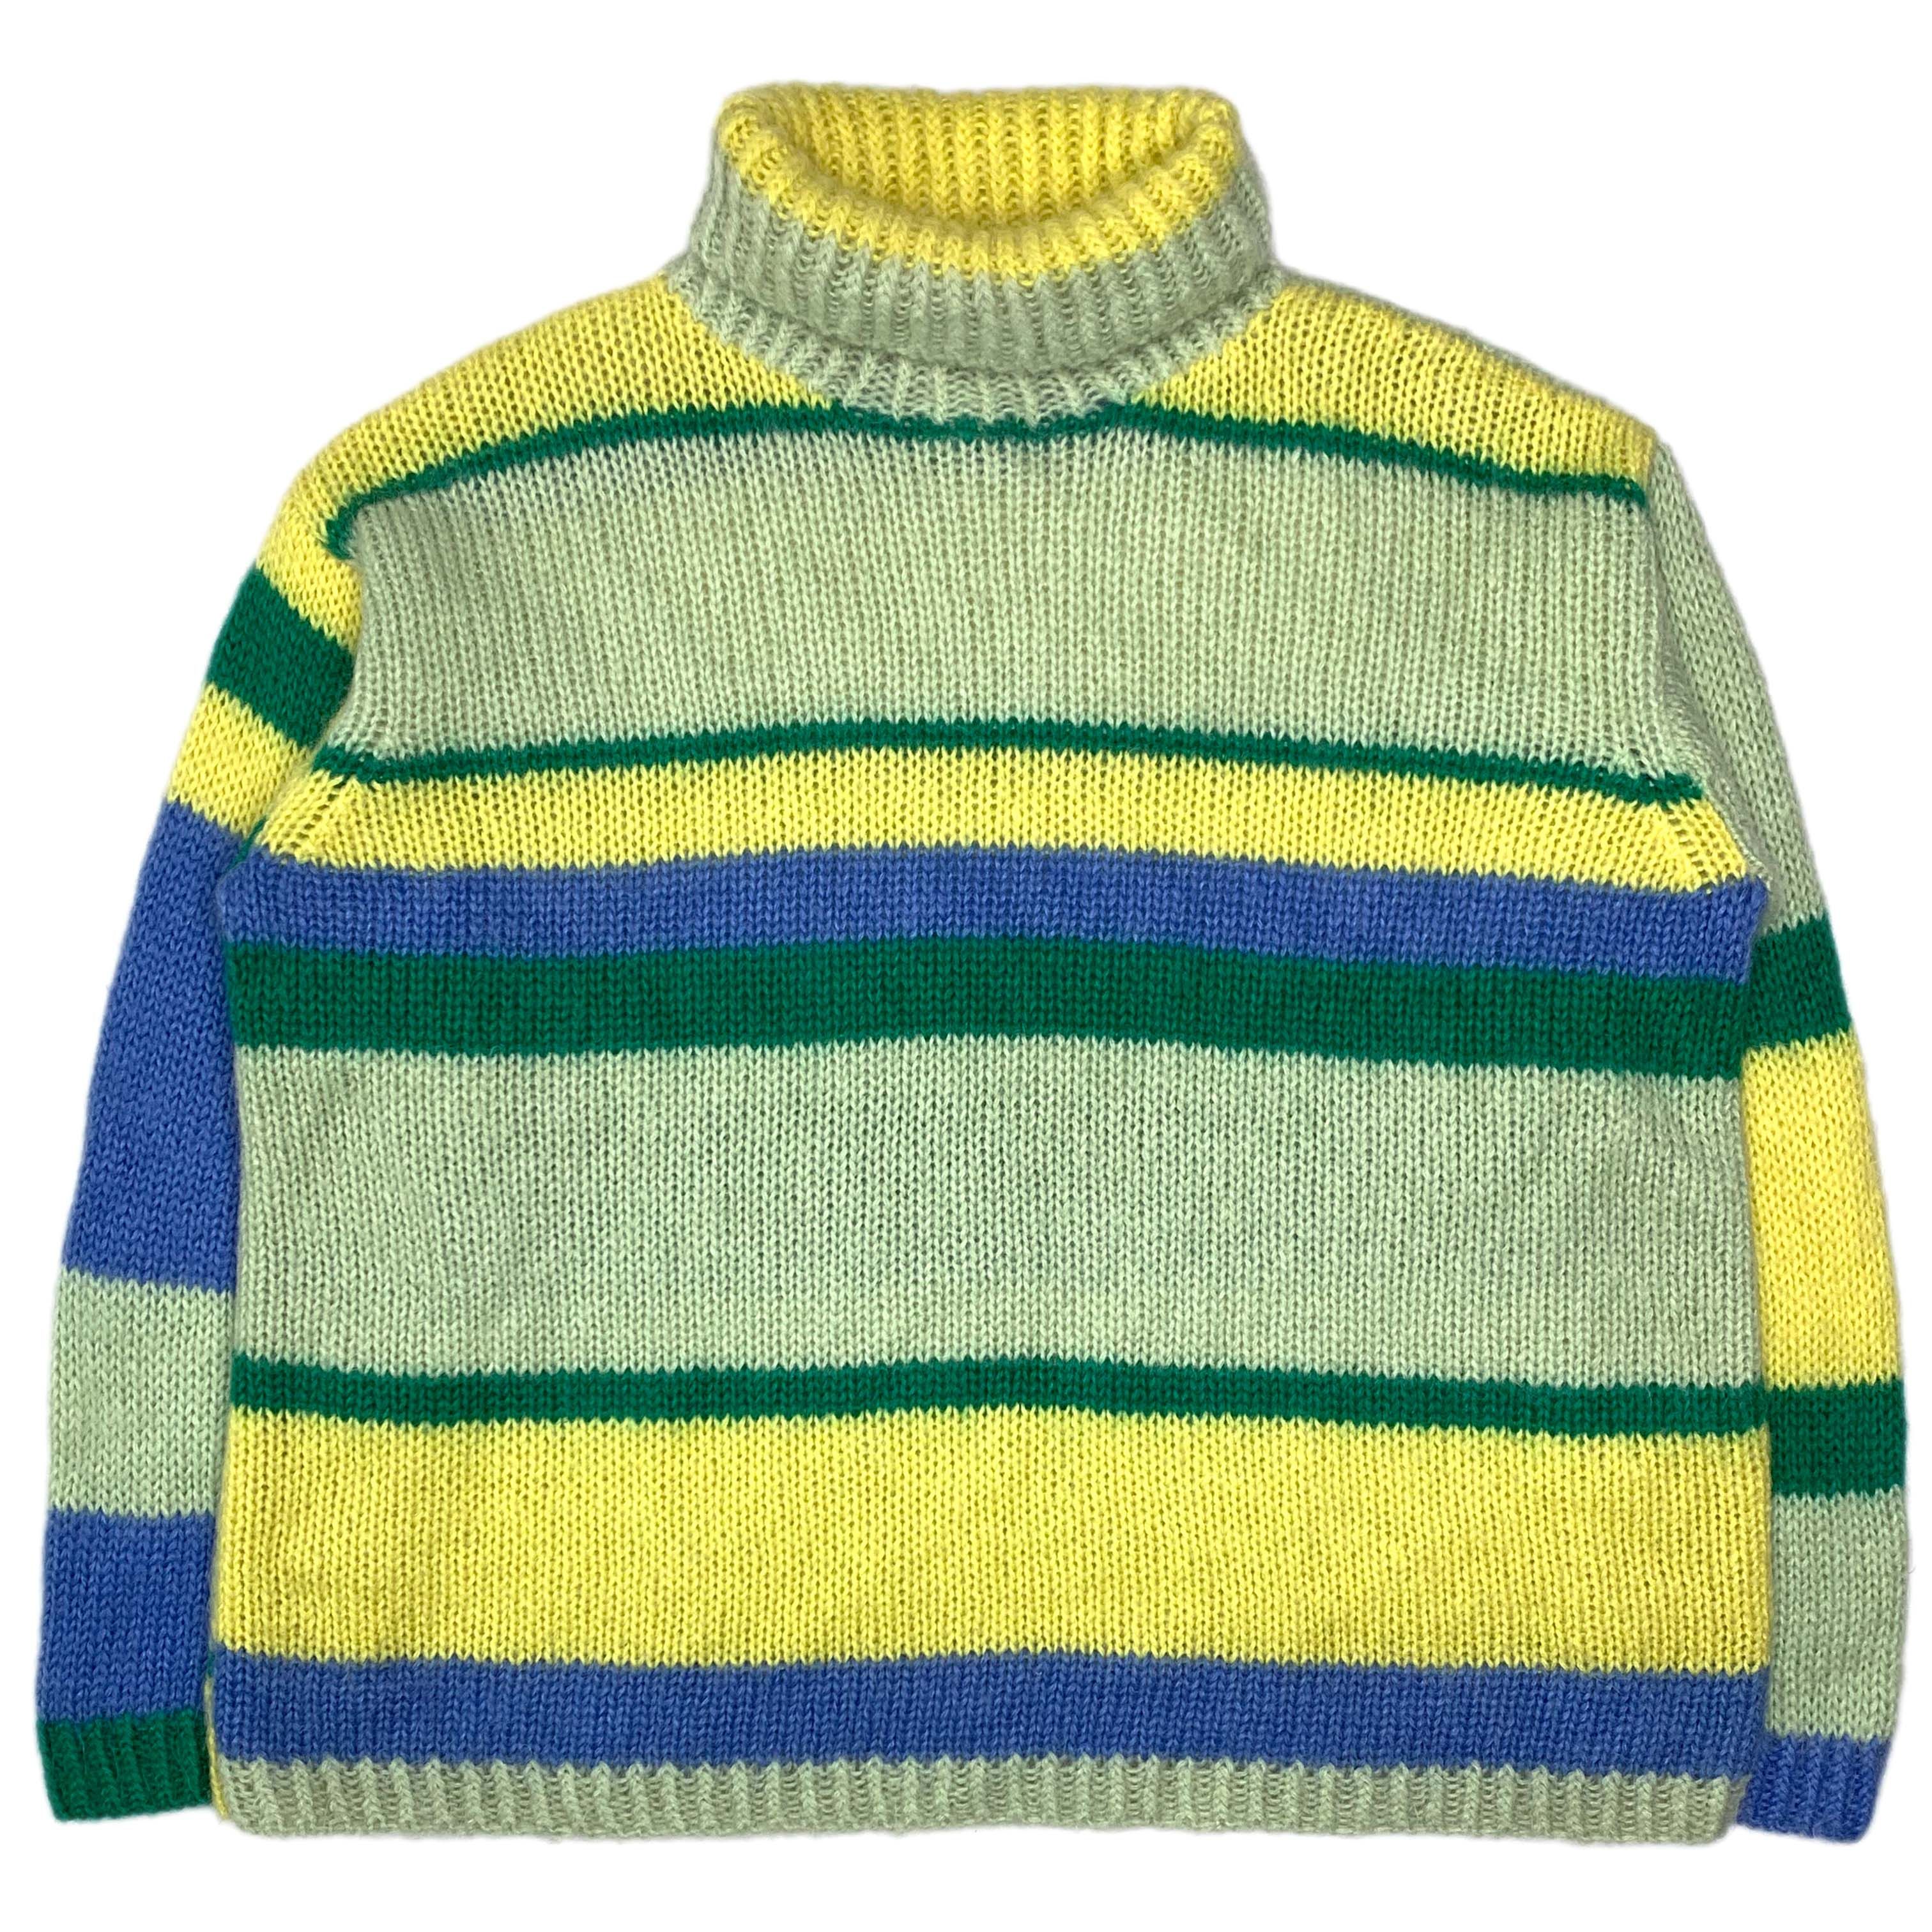 AW90 Colorful Oversized Striped Mohair Sweater - 1